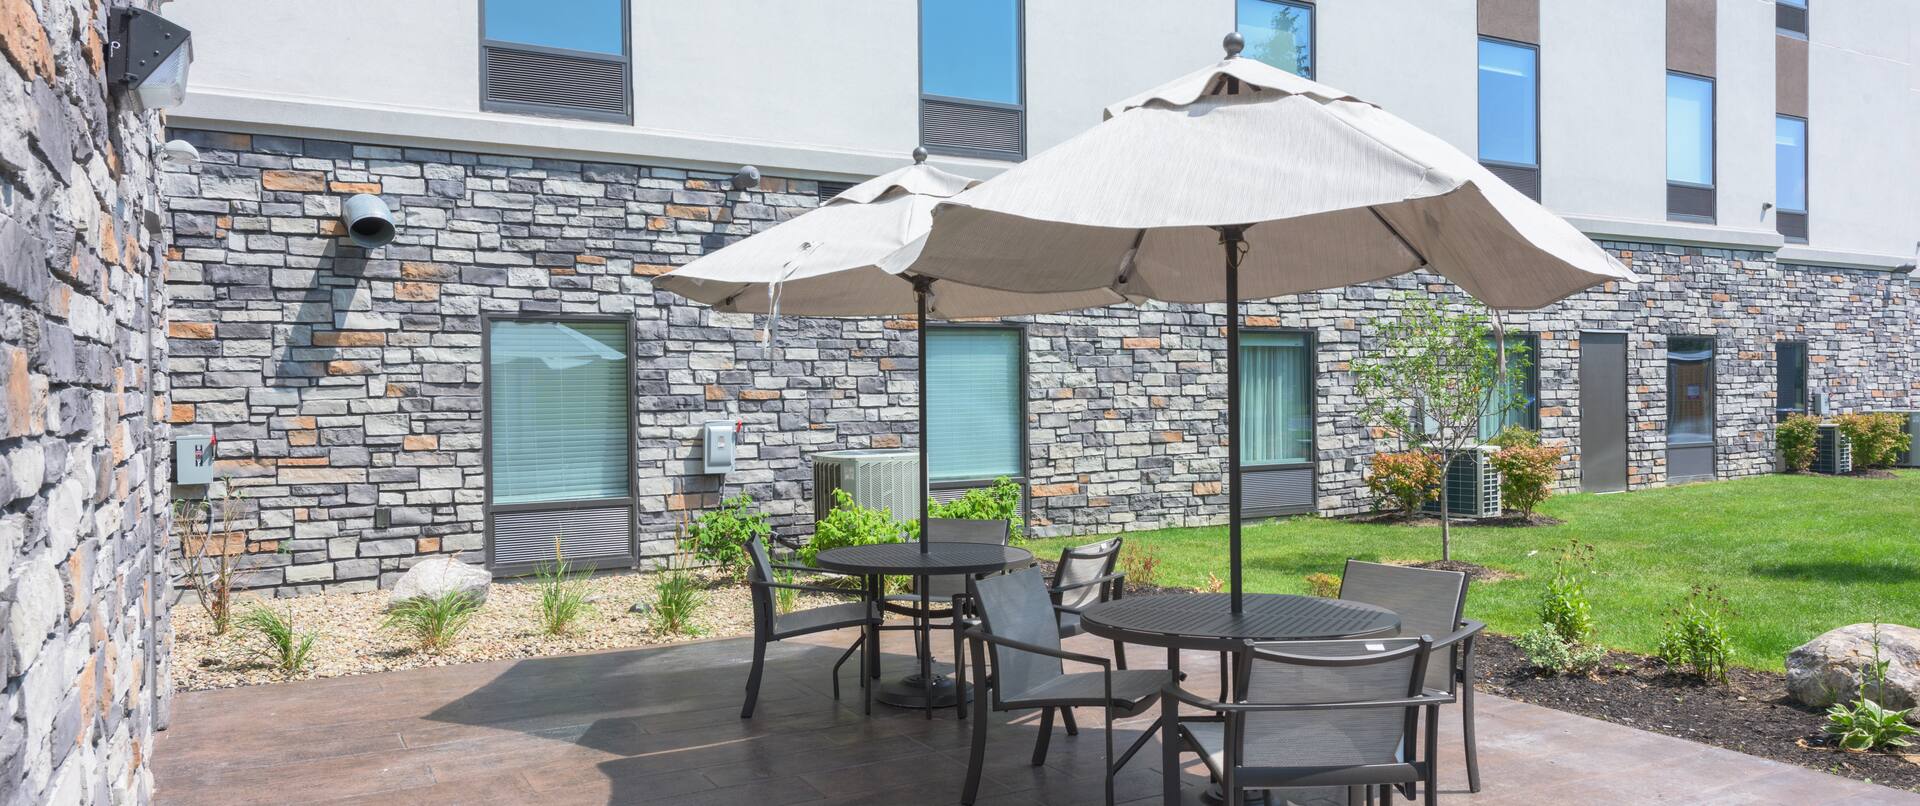 Two Patio Tables with Three Chairs and One Umbrella at Each  with view of Building Exterior and Landscaping